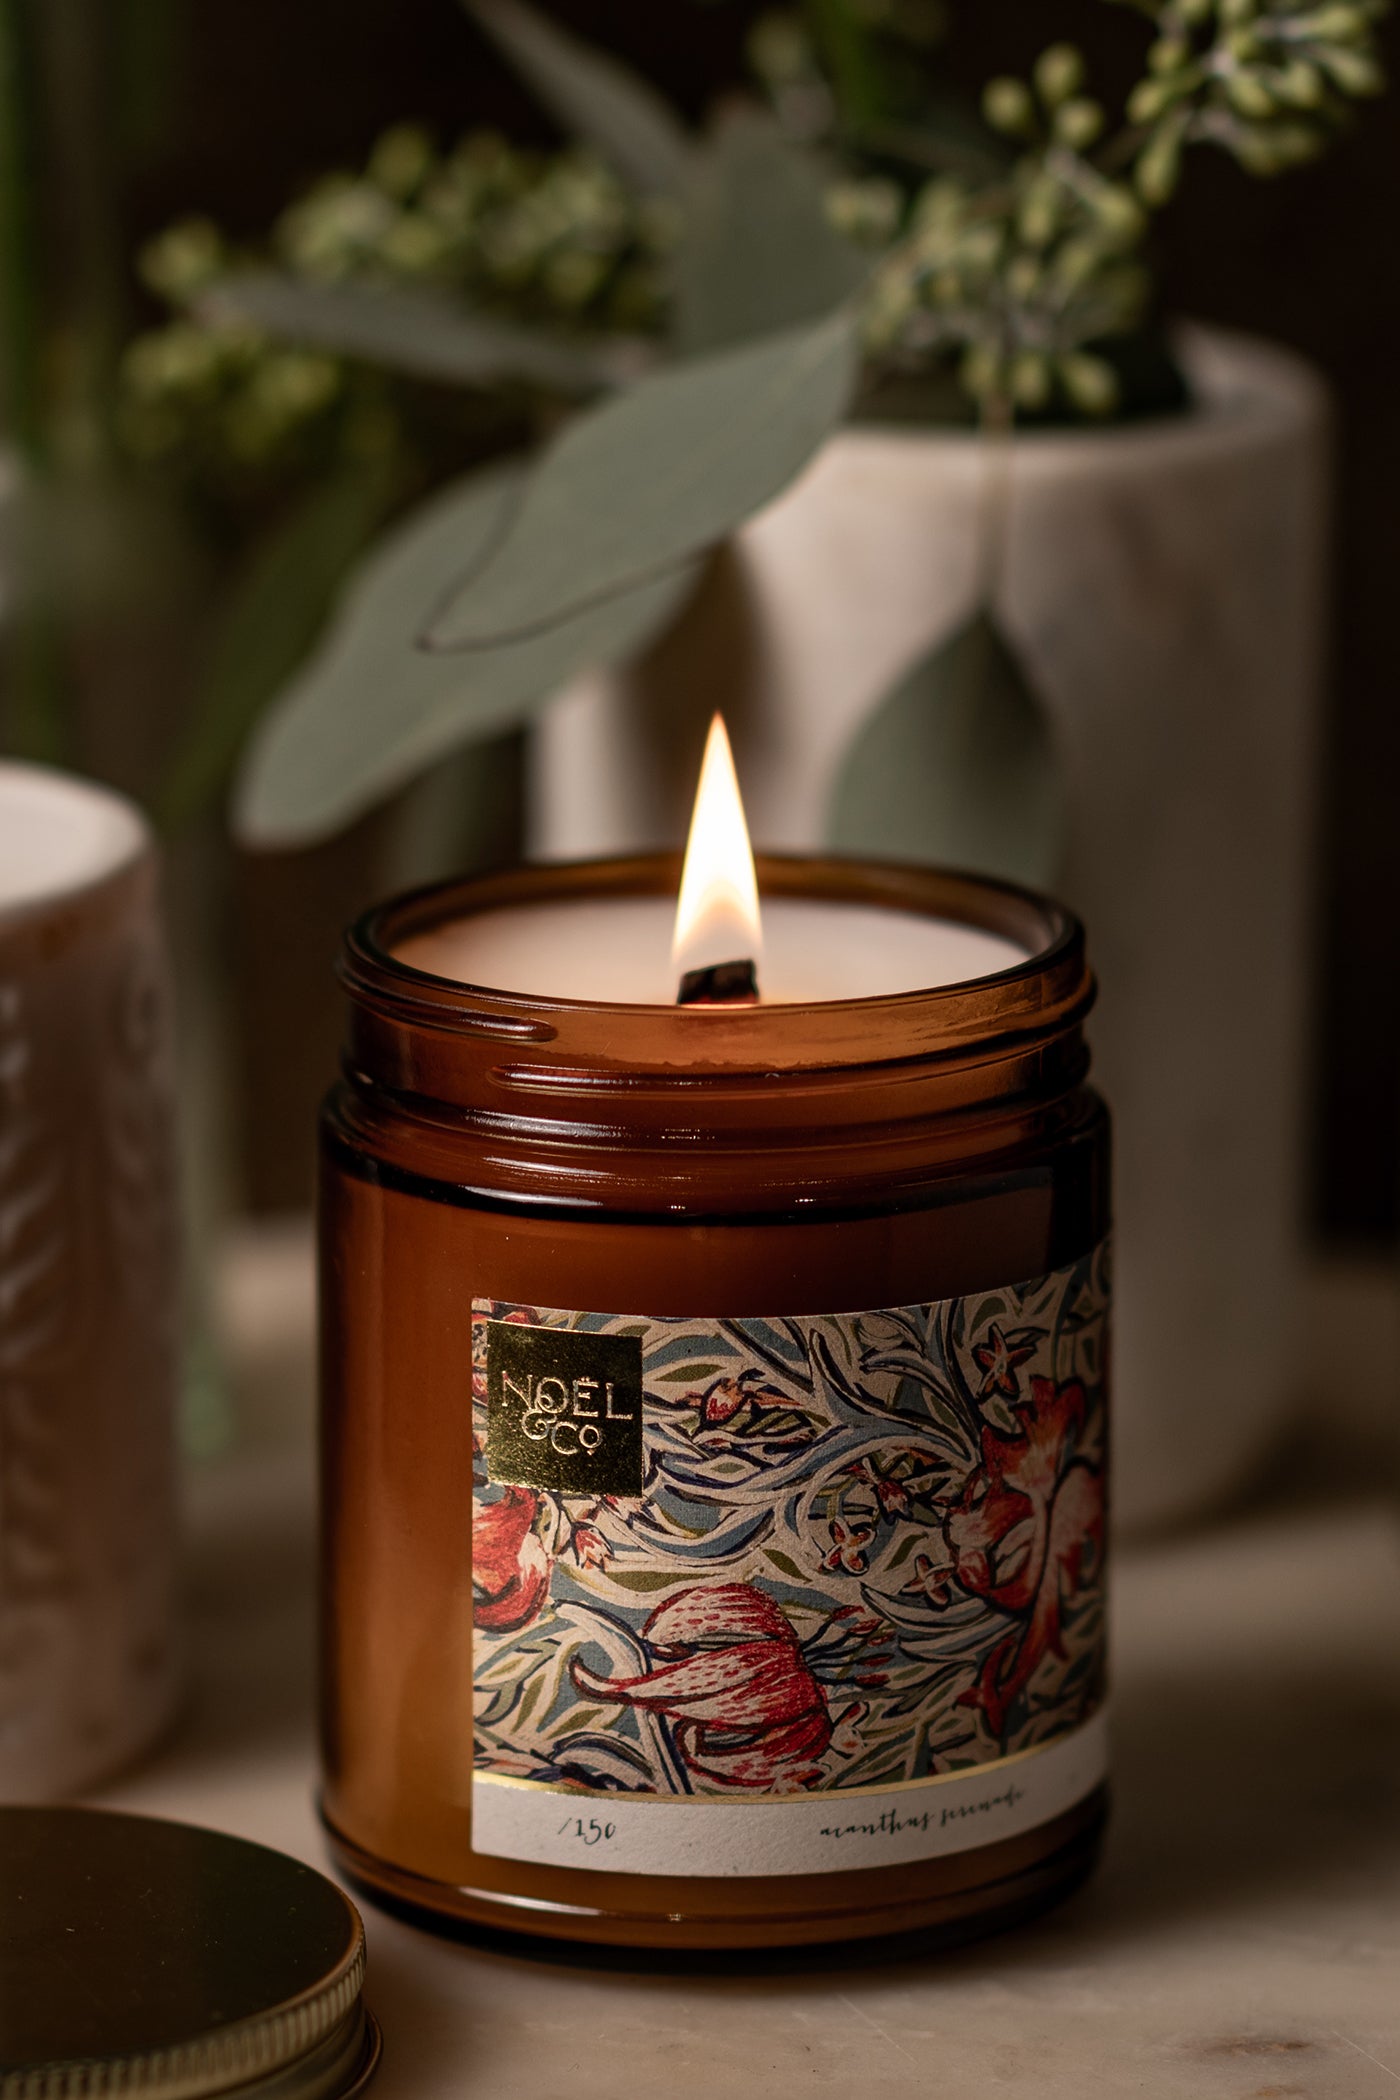 A lit candle in an amber glass jar with a wooden wick and a original art piece featured on the label.